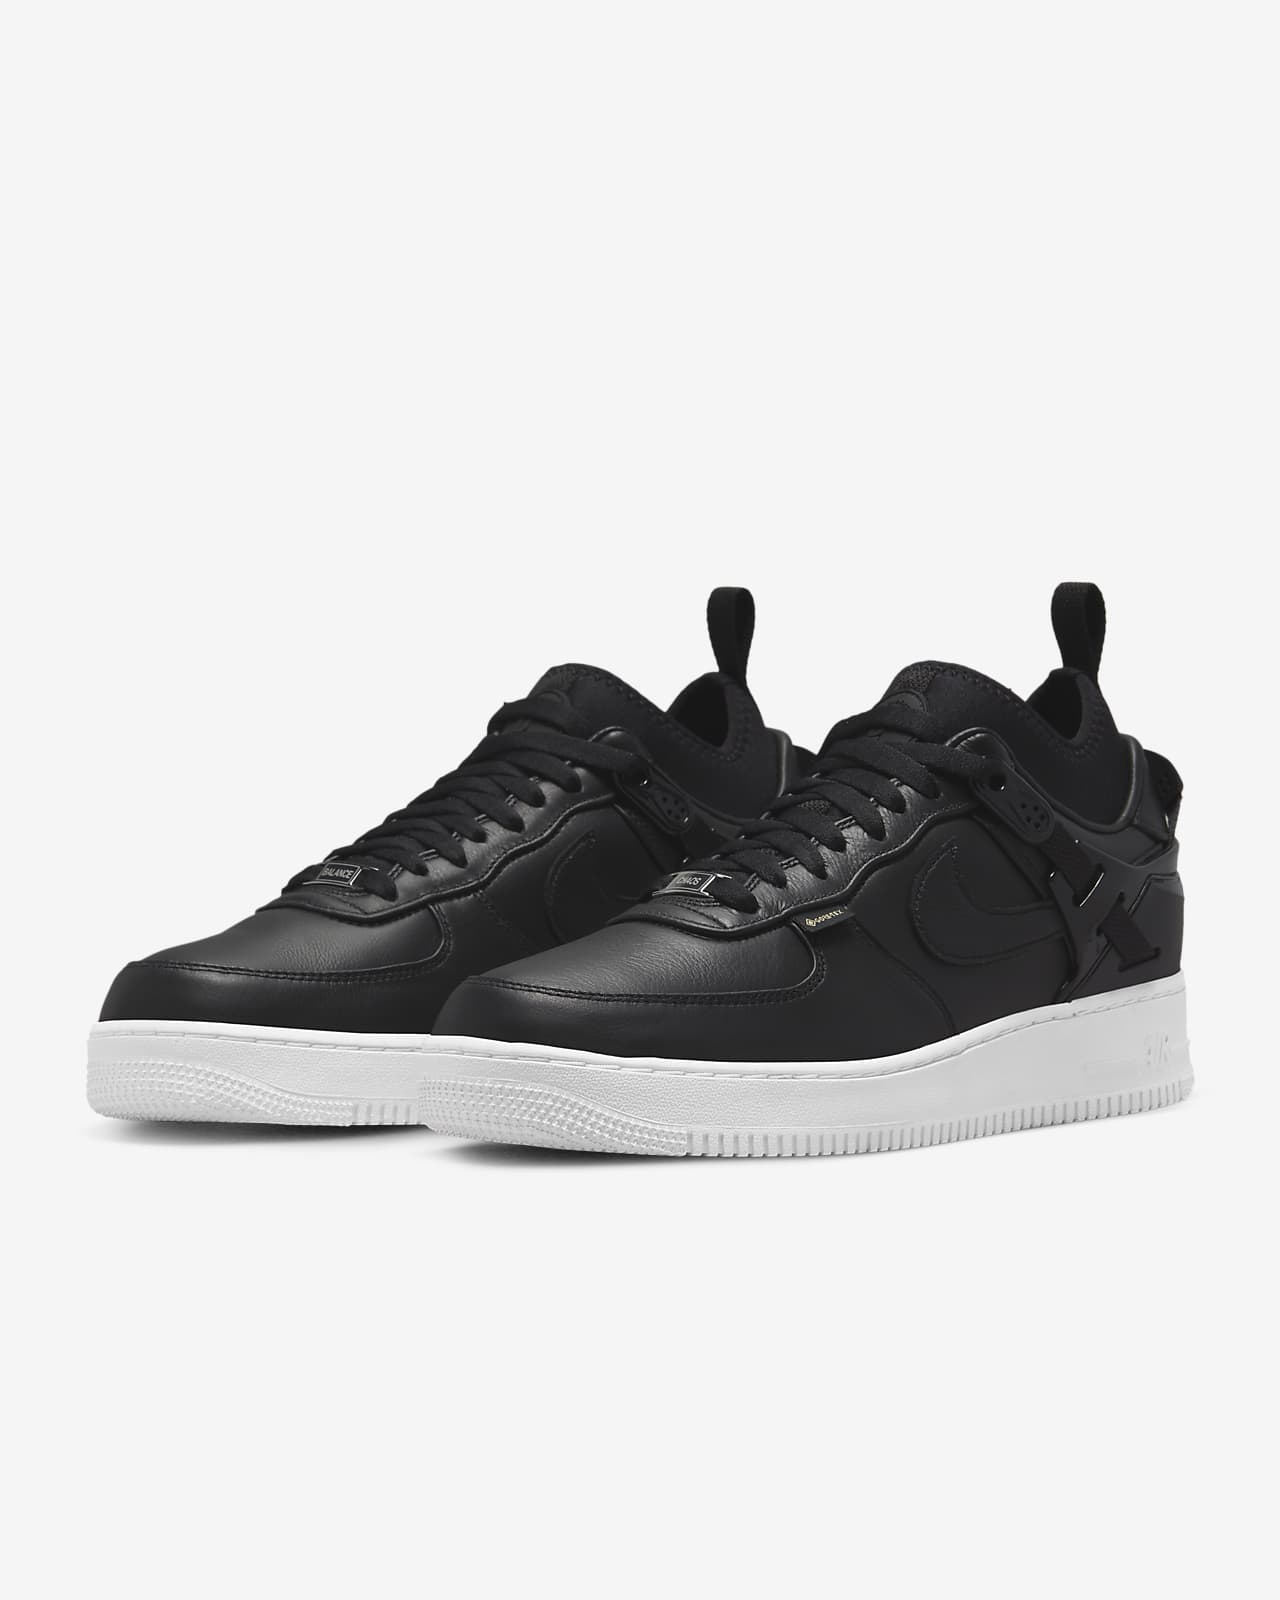 NIKE AIR FORCE 1 LOW SP × UNDERCOVER